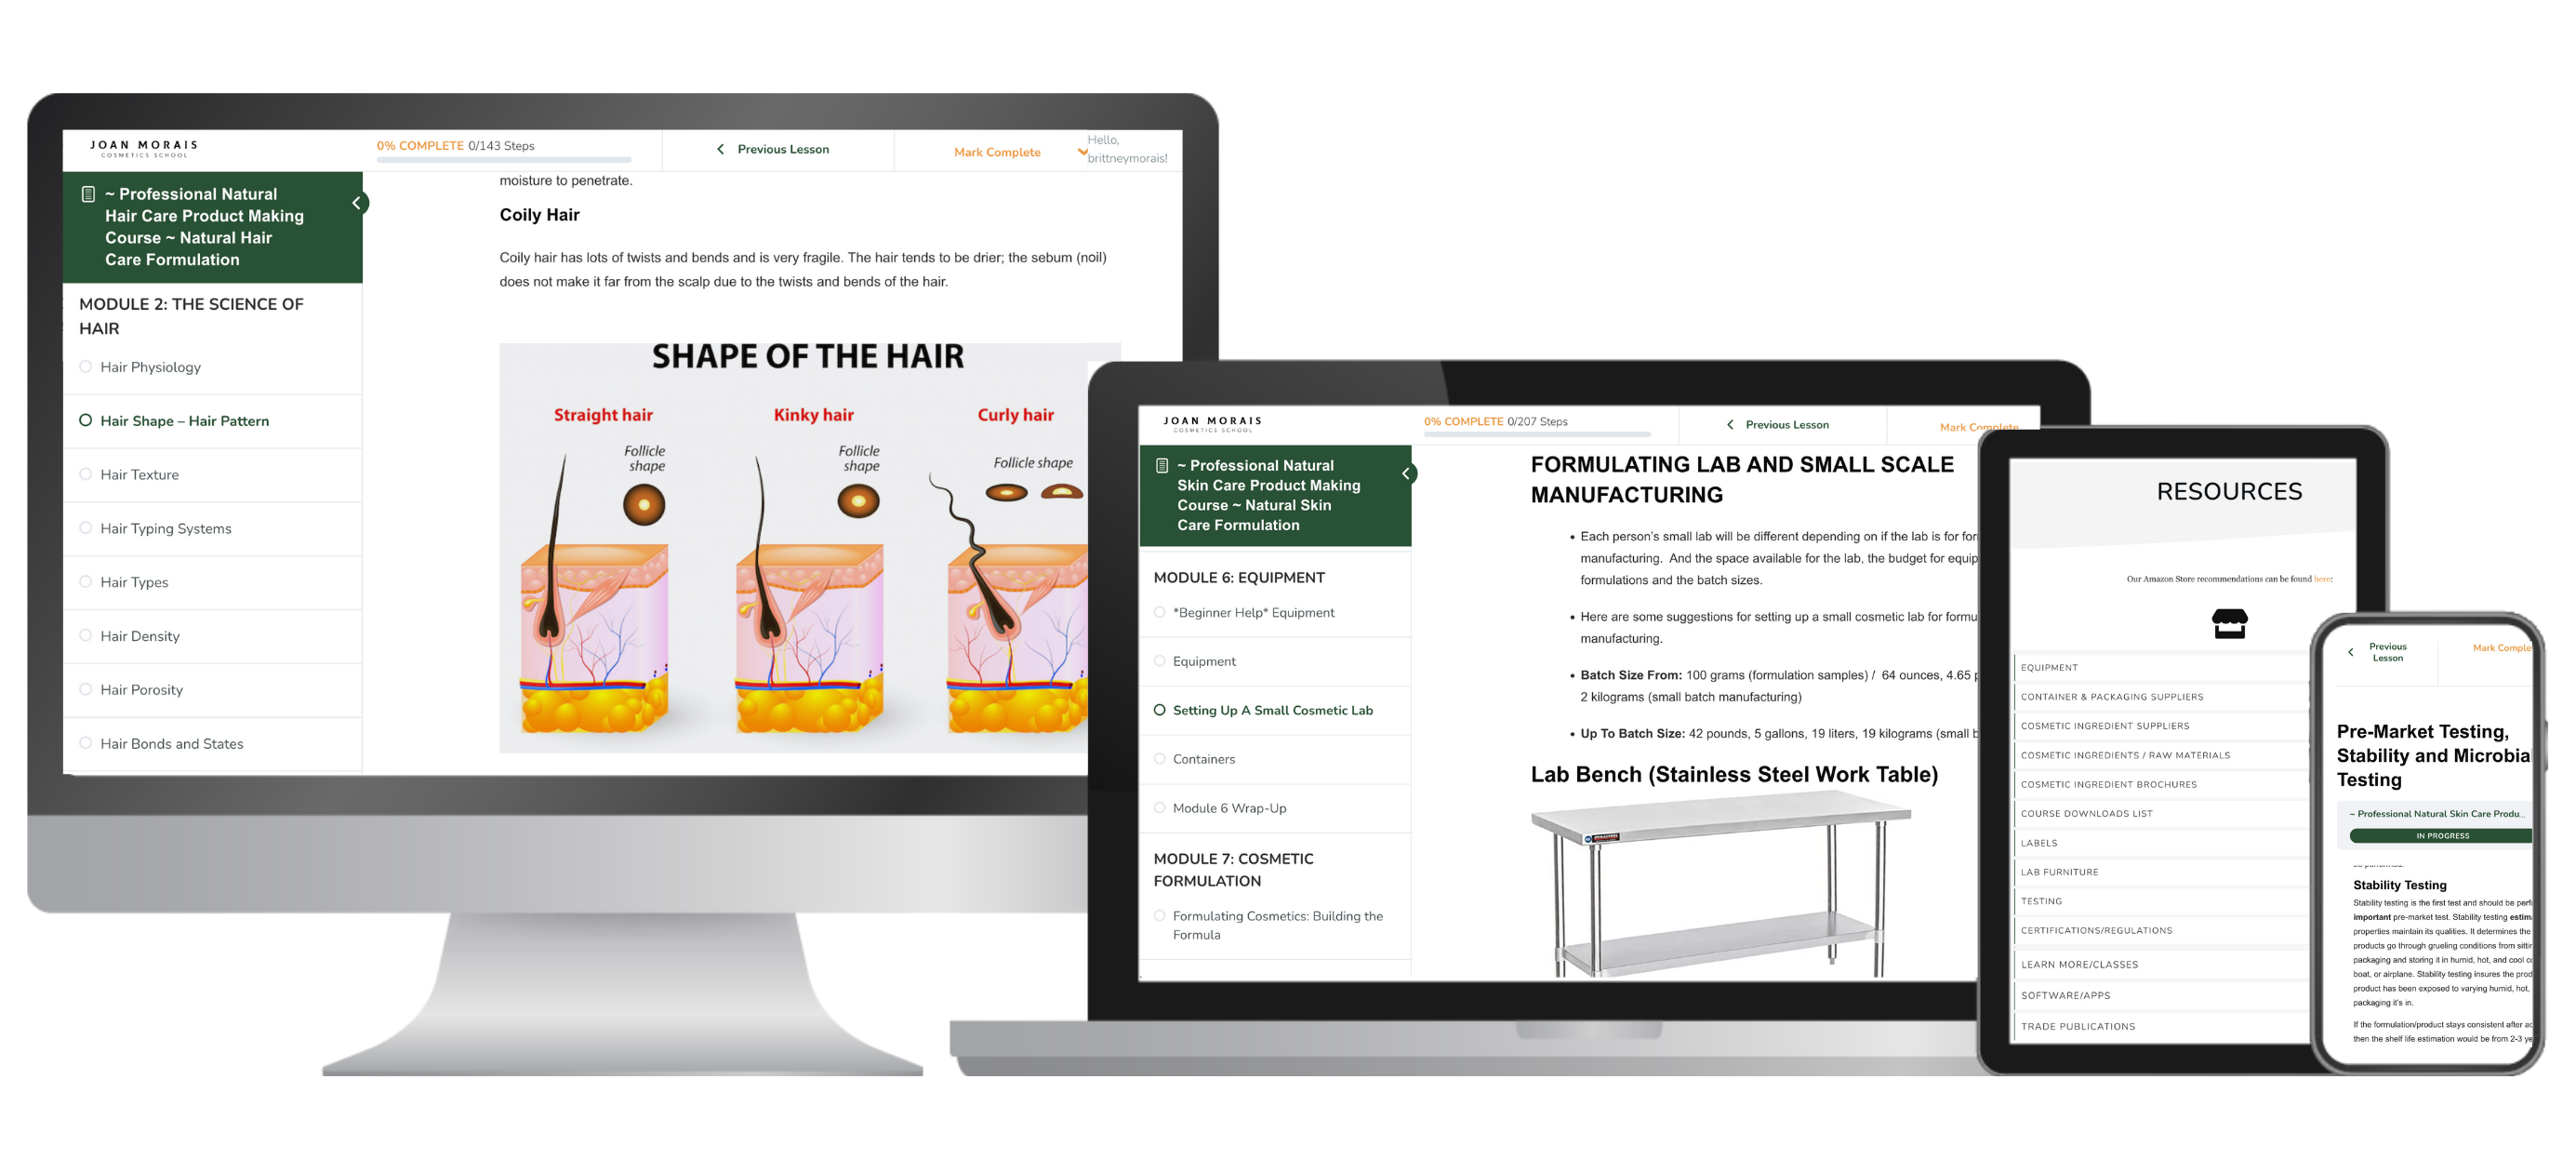 Natural Hair Care Formulation Course